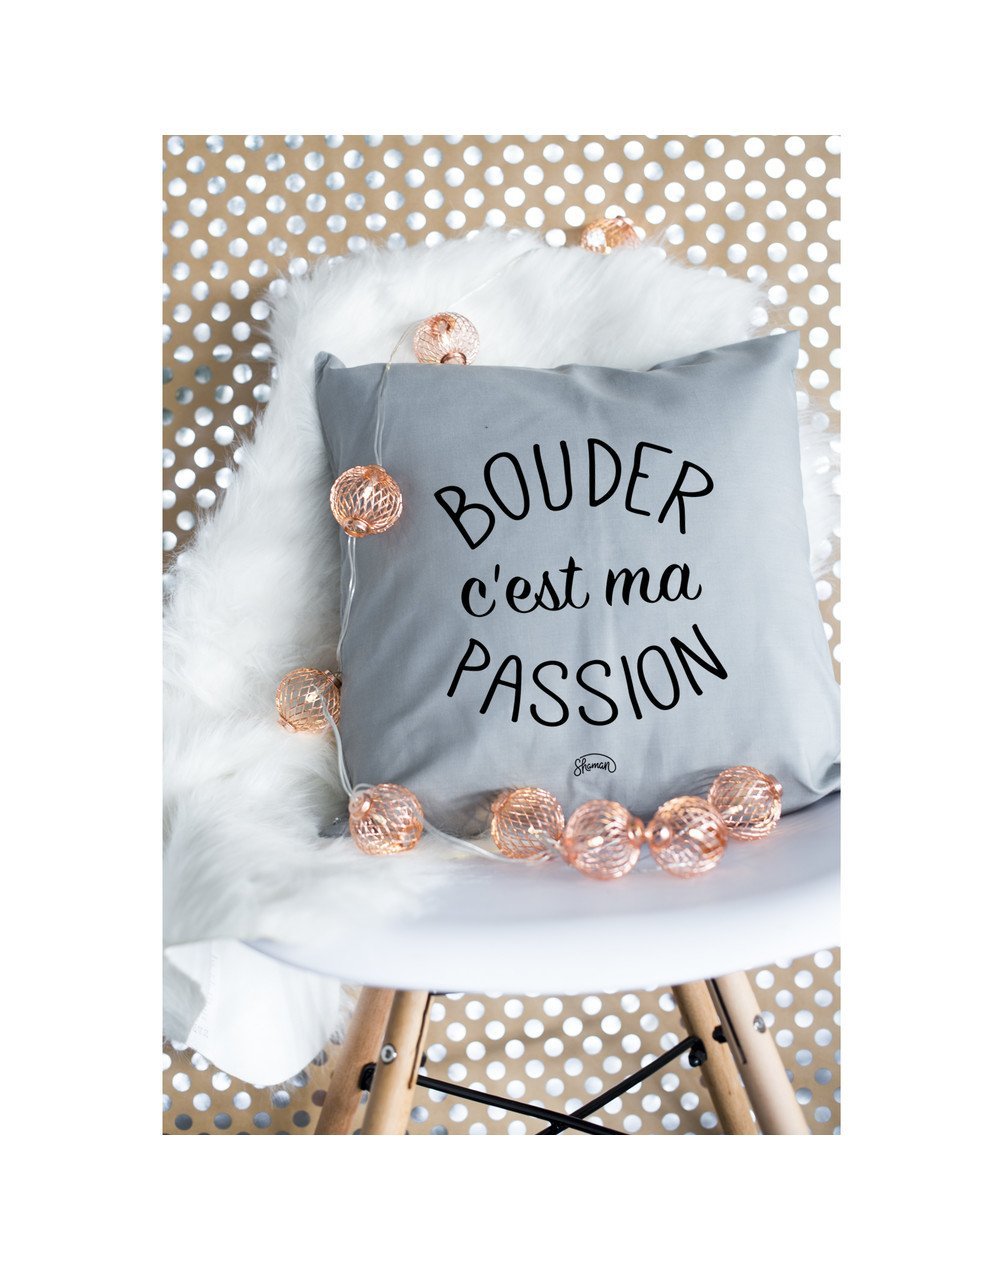 Coussin "Bouder passion"